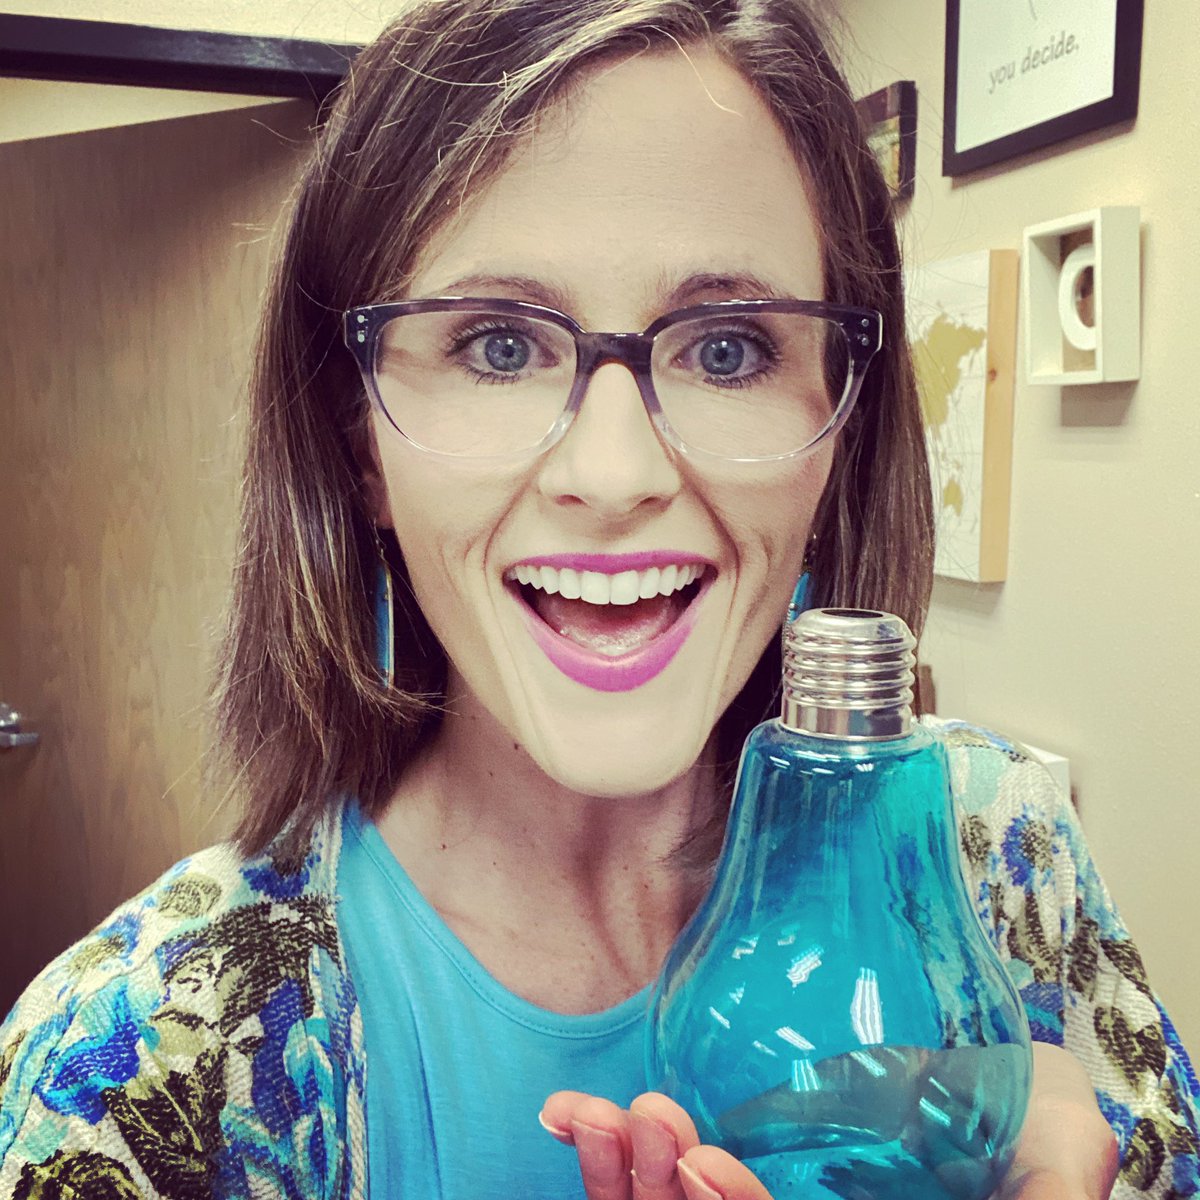 Mrs. Carr wants to give a shoutout to all the AUsome students out there. Keep lighting up the world with your brilliance and wonder. #LightItUpBlue #AutismAwareness #BelaireBFF